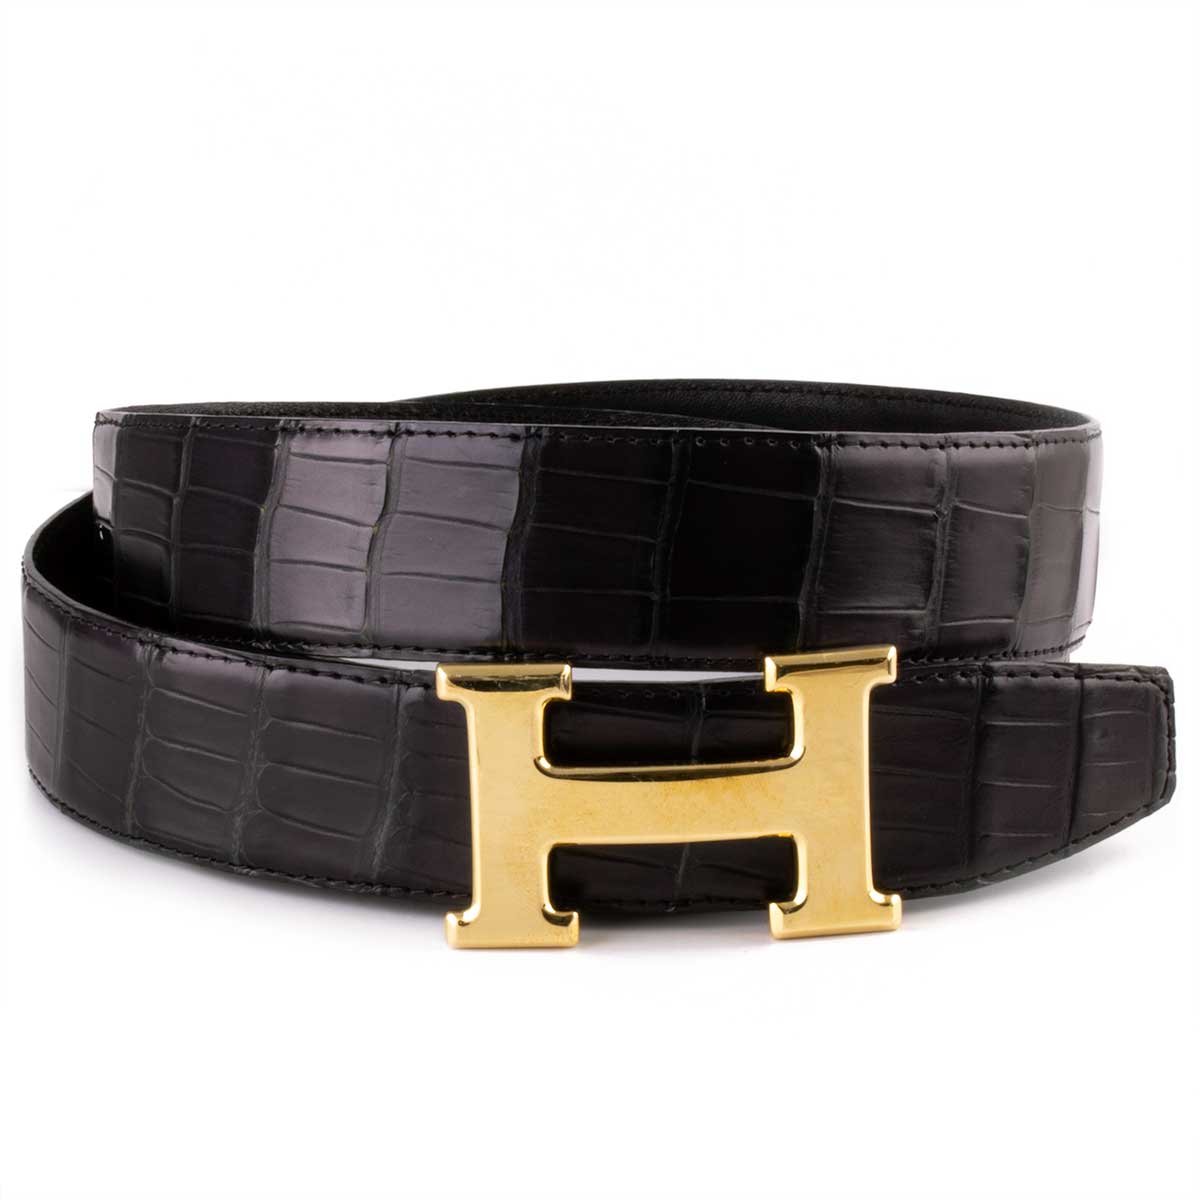 Hermes Style | Classic Alligator Leather Belt (SPECIAL ORDER)